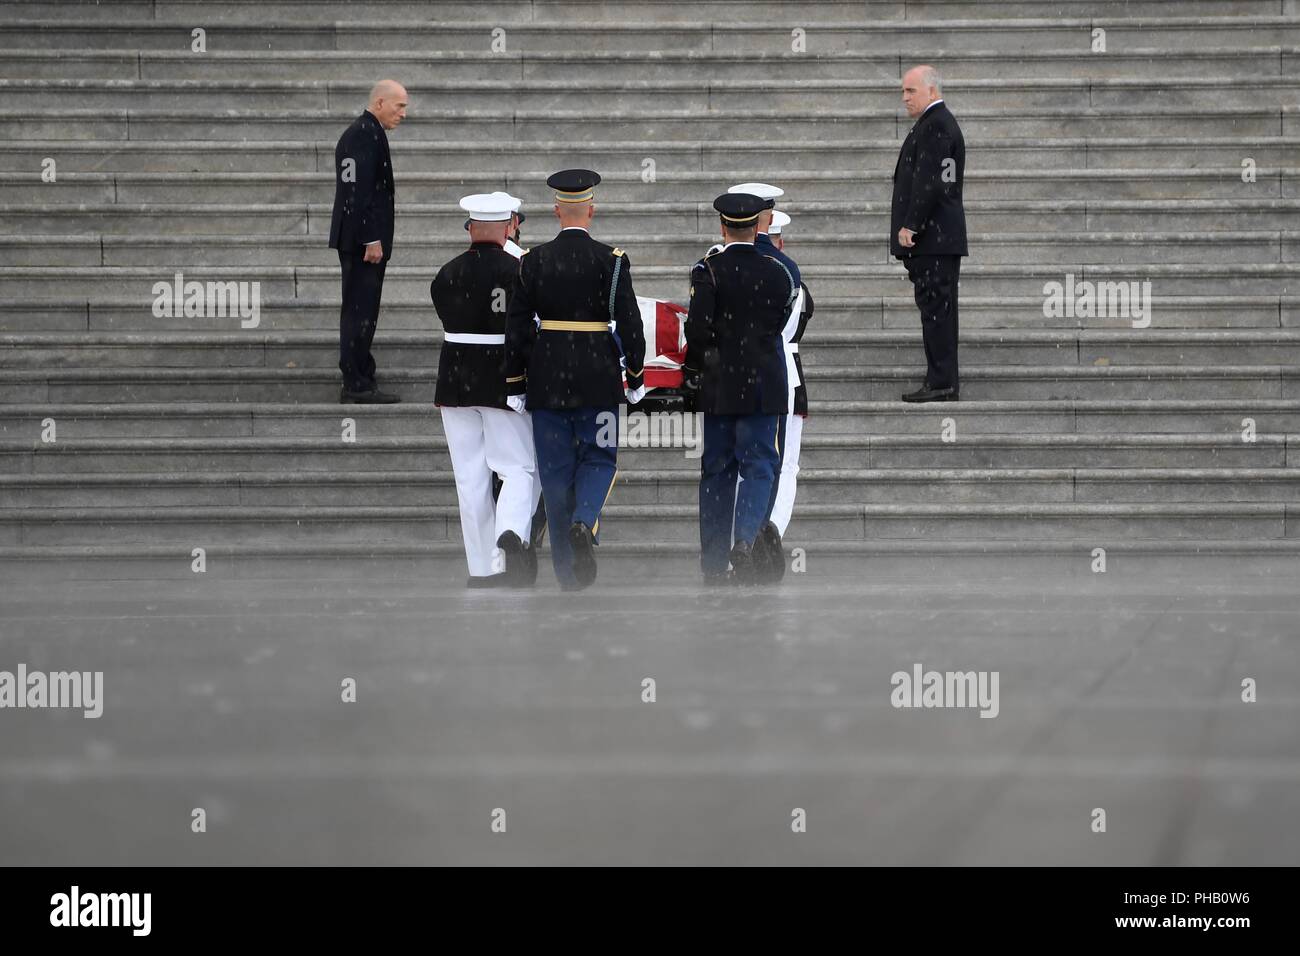 Washington, USA. 31st Aug, 2018. Soldiers carry the casket of former U.S. Senator John McCain to the east entrance of the U.S. Capitol in Washington, DC, the United States, on Aug. 31, 2018. John McCain, a two-time contender for the U.S. presidency, died at his home in the state of Arizona on Aug. 25. Credit: Yang Chenglin/Xinhua/Alamy Live News Stock Photo